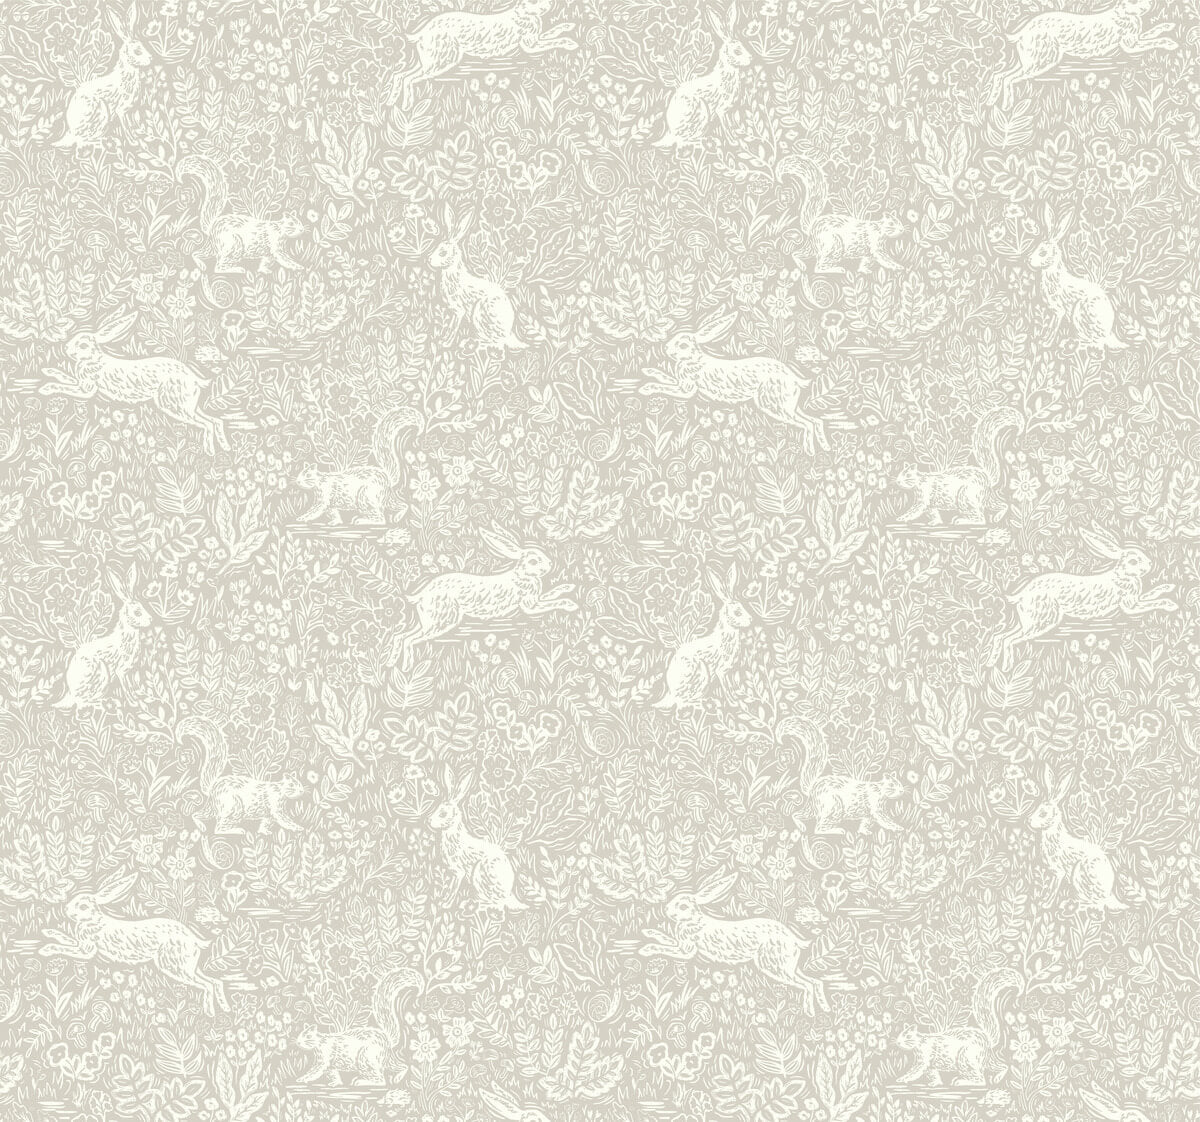 Rifle Paper Co. Fable Wallpaper - SAMPLE